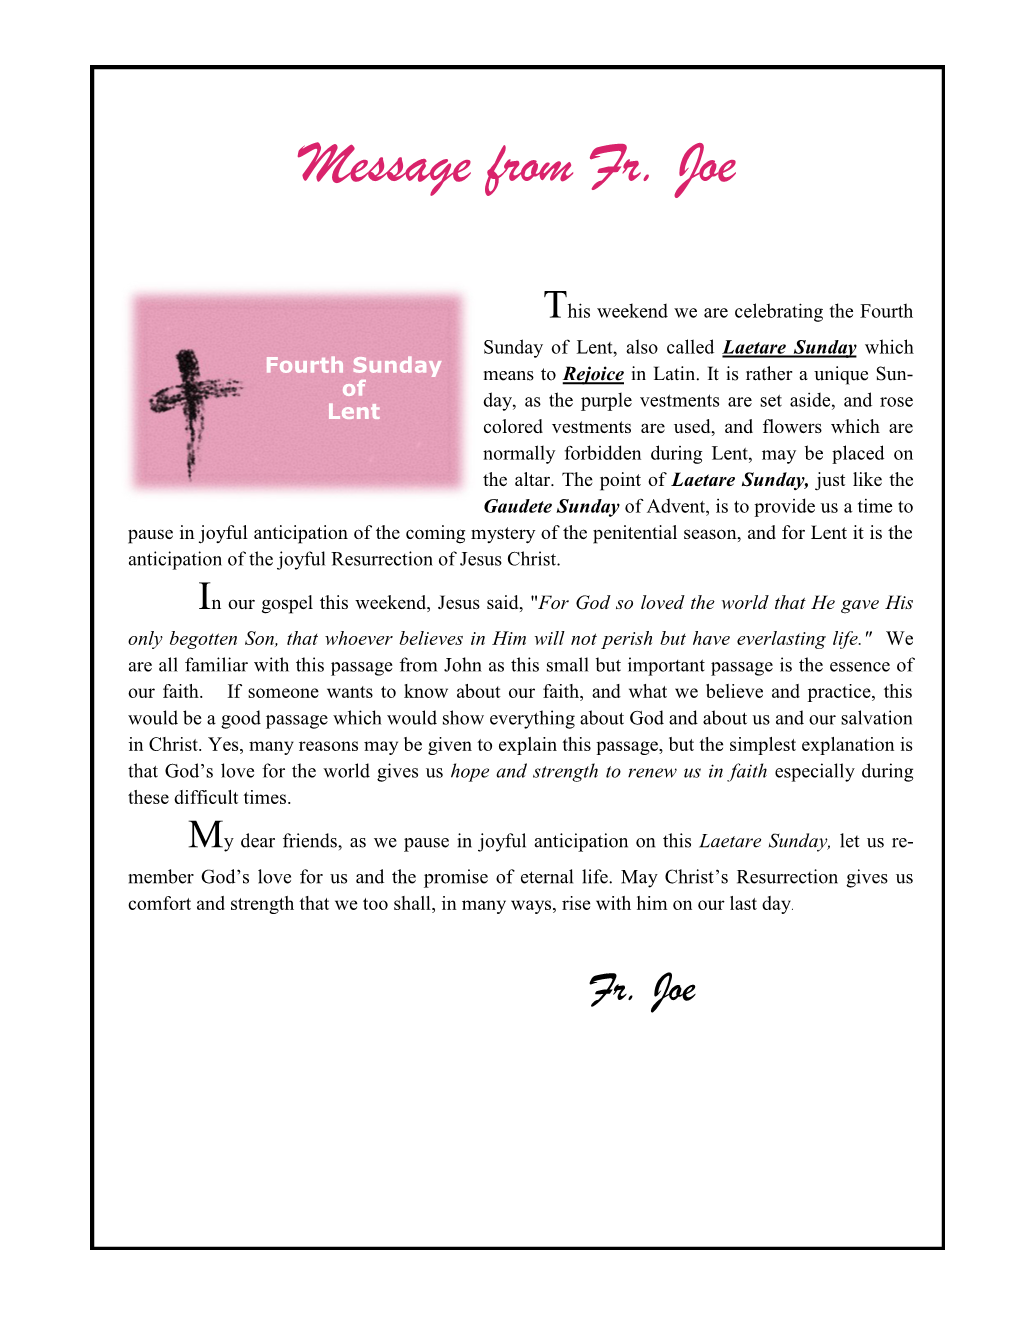 Message from Fr. Joe for 4Th Sunday of Lent